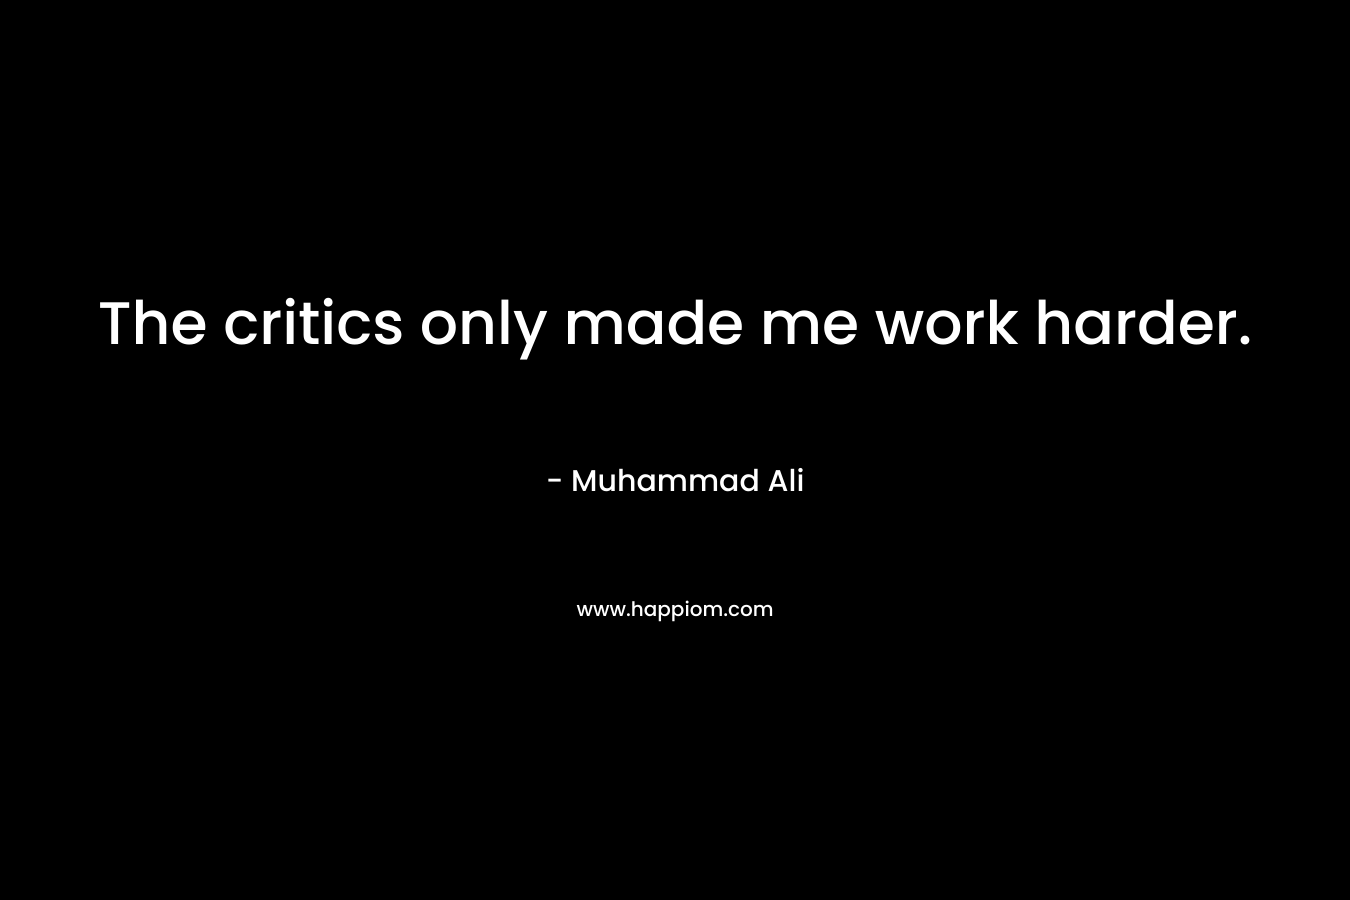 The critics only made me work harder. – Muhammad Ali